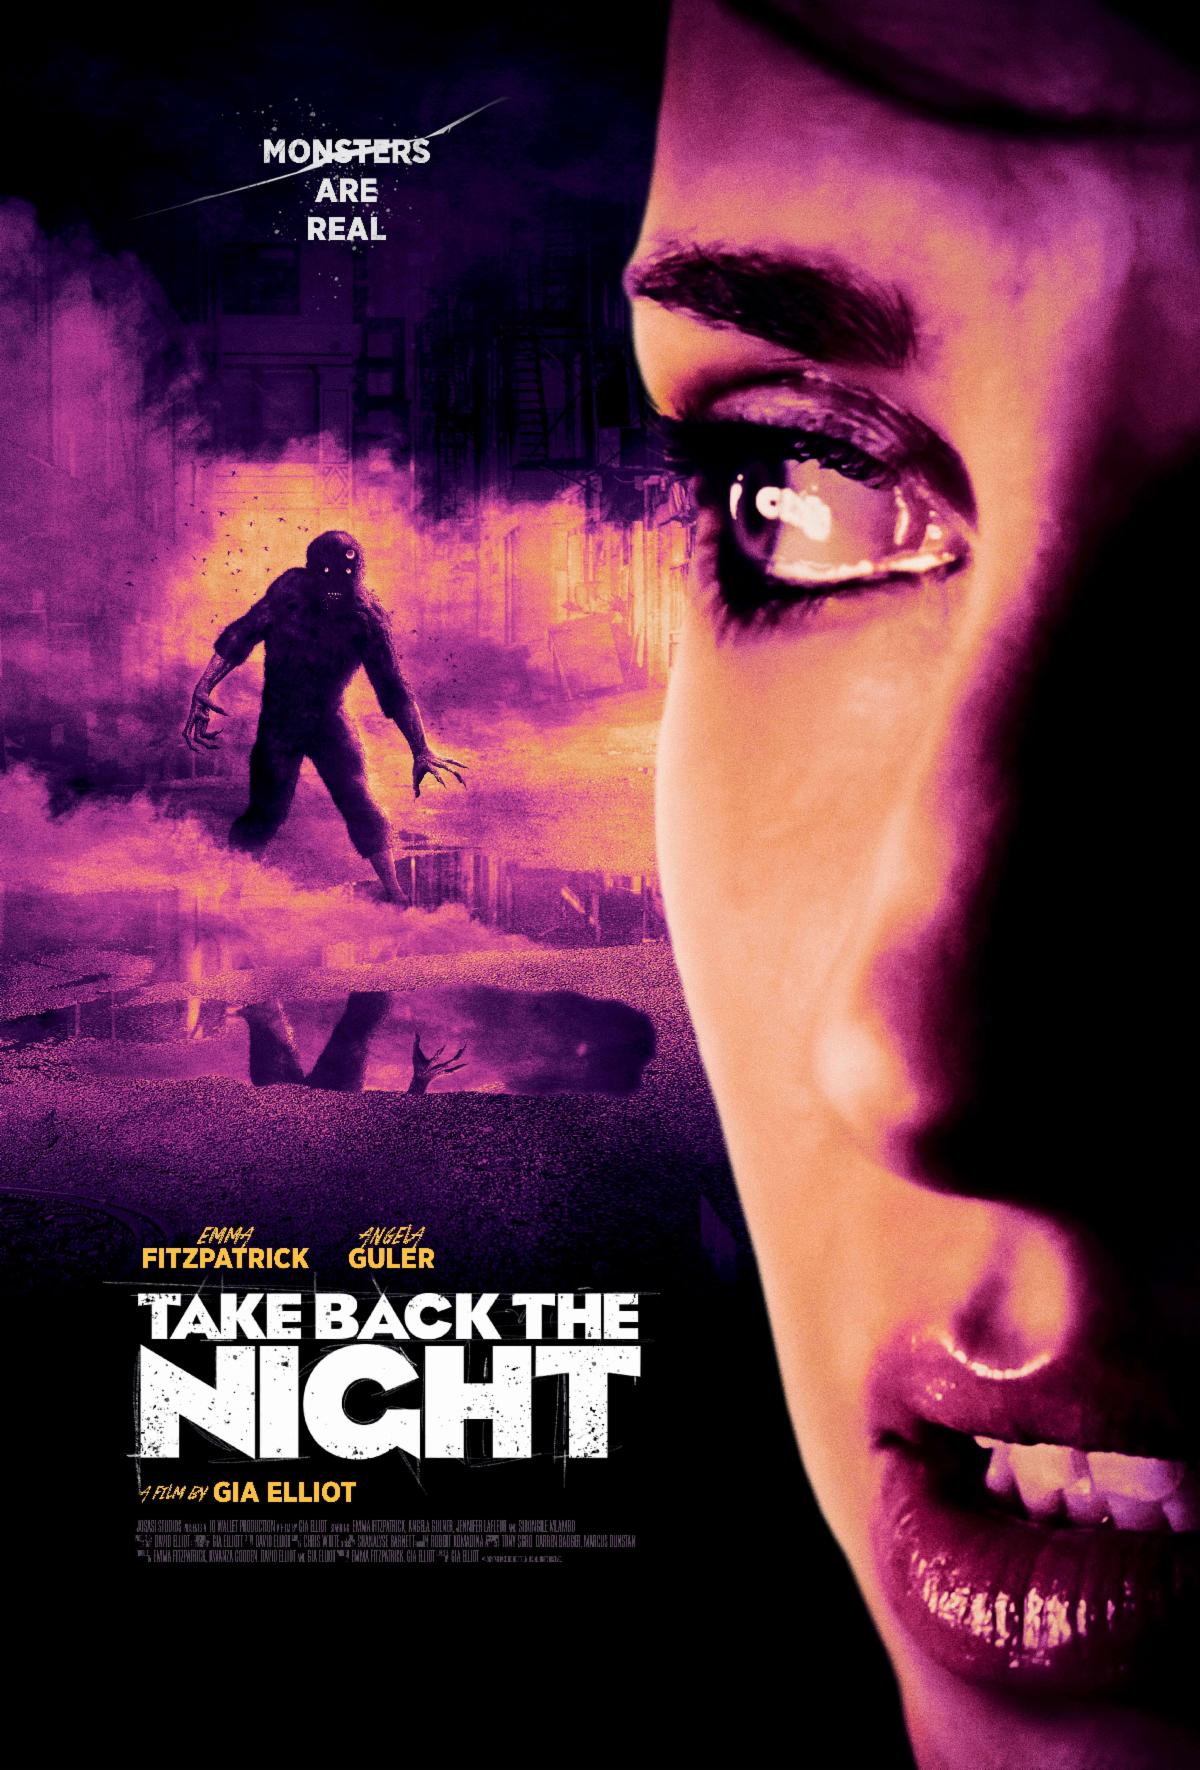 'Take Back the Night' Goes After Monsters on Digital March 4